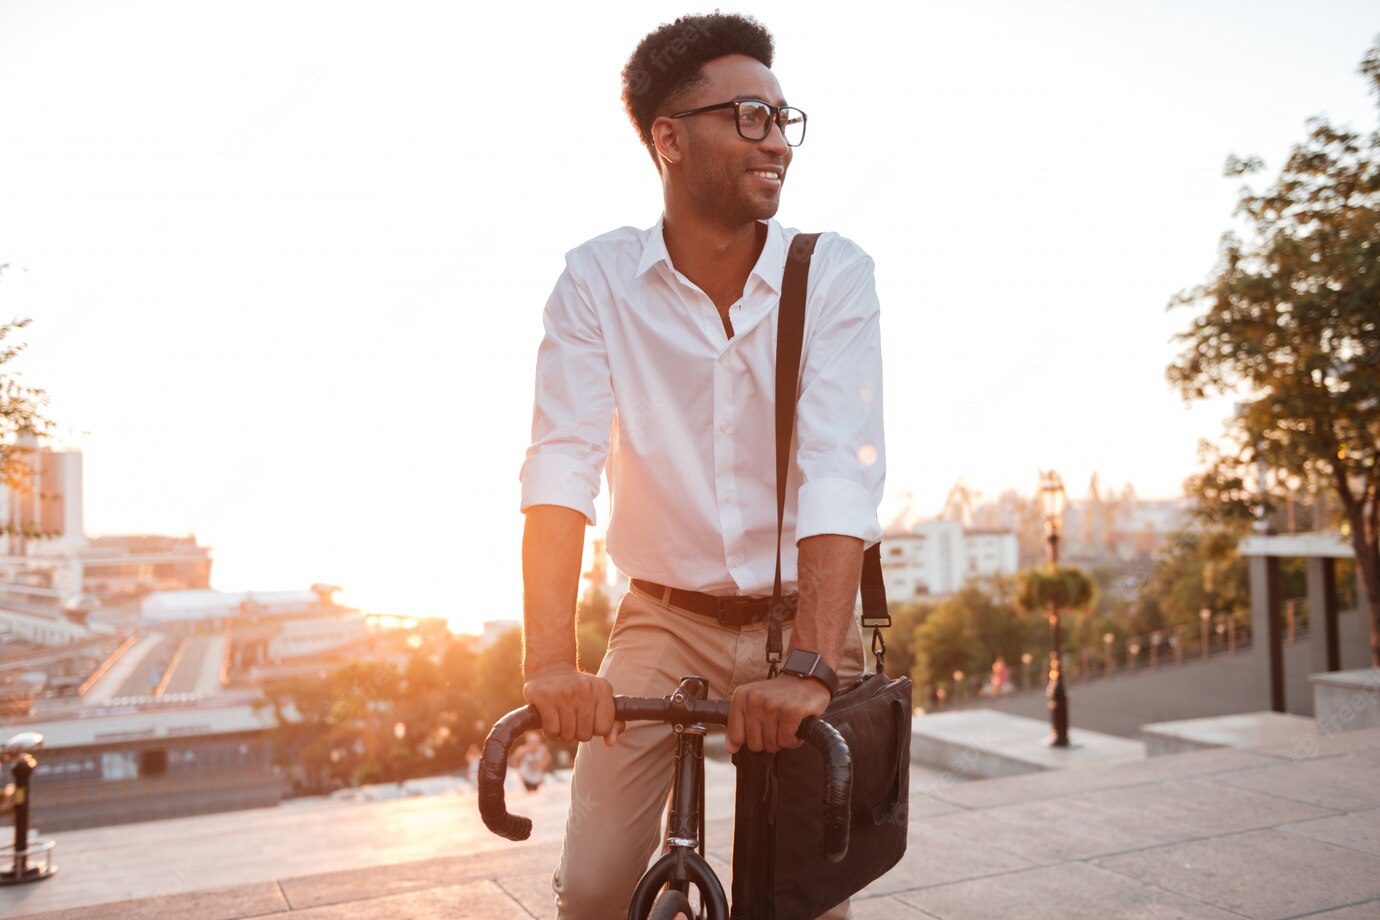 Concentrated Young African Man Early Morning With Bicycle 171337 12948